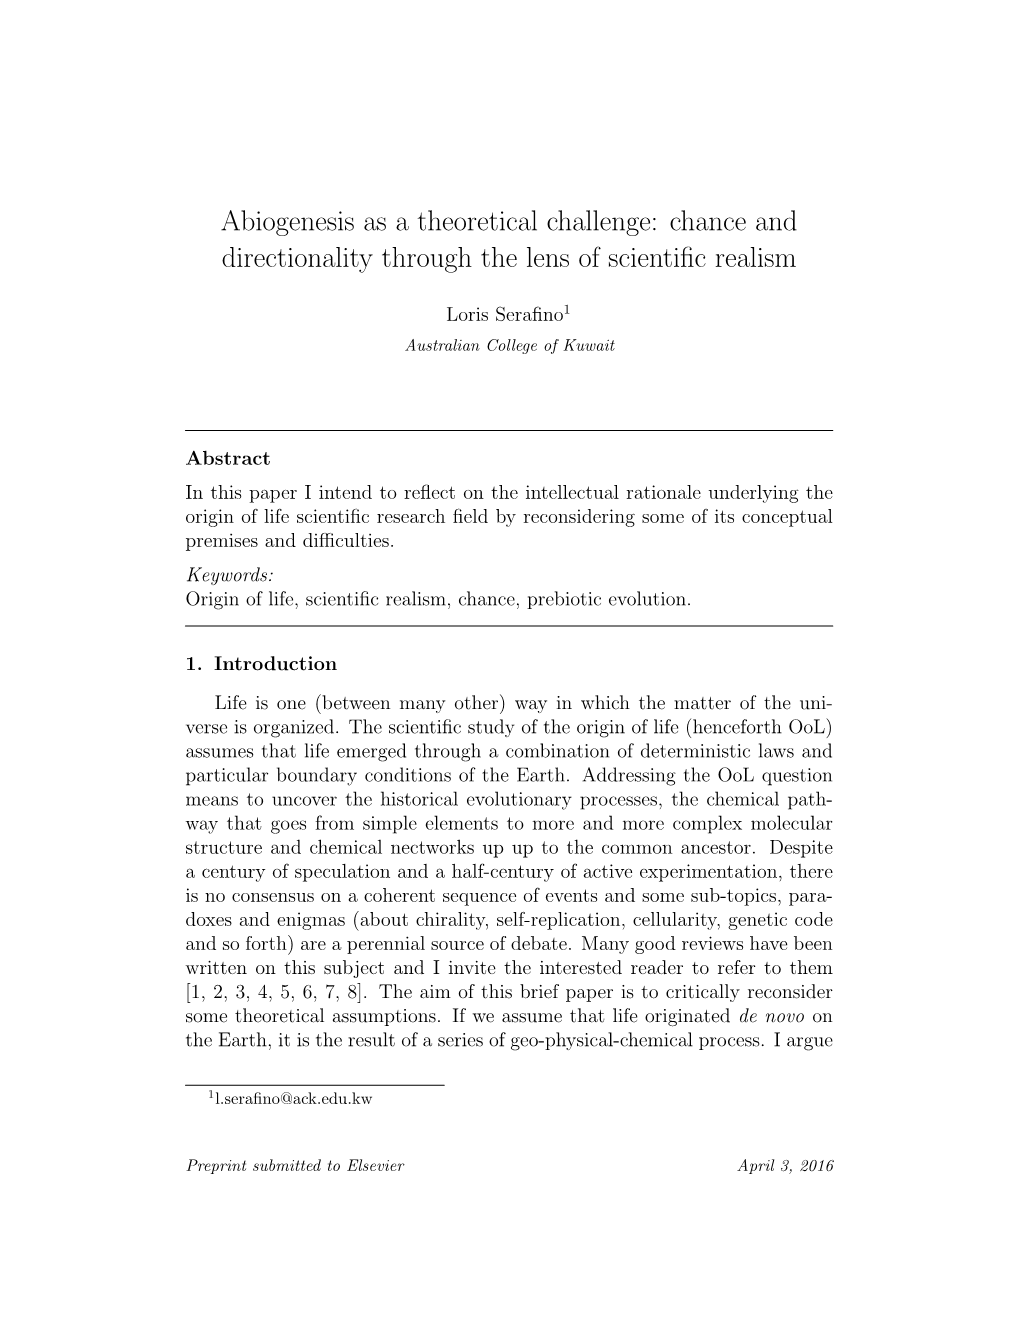 Abiogenesis As a Theoretical Challenge: Chance and Directionality Through the Lens of Scientiﬁc Realism